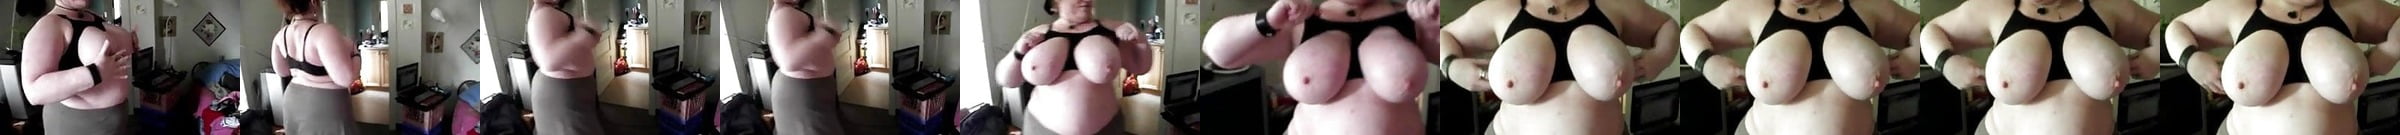 Featured Jiggling Tits Porn Videos 4 Xhamster